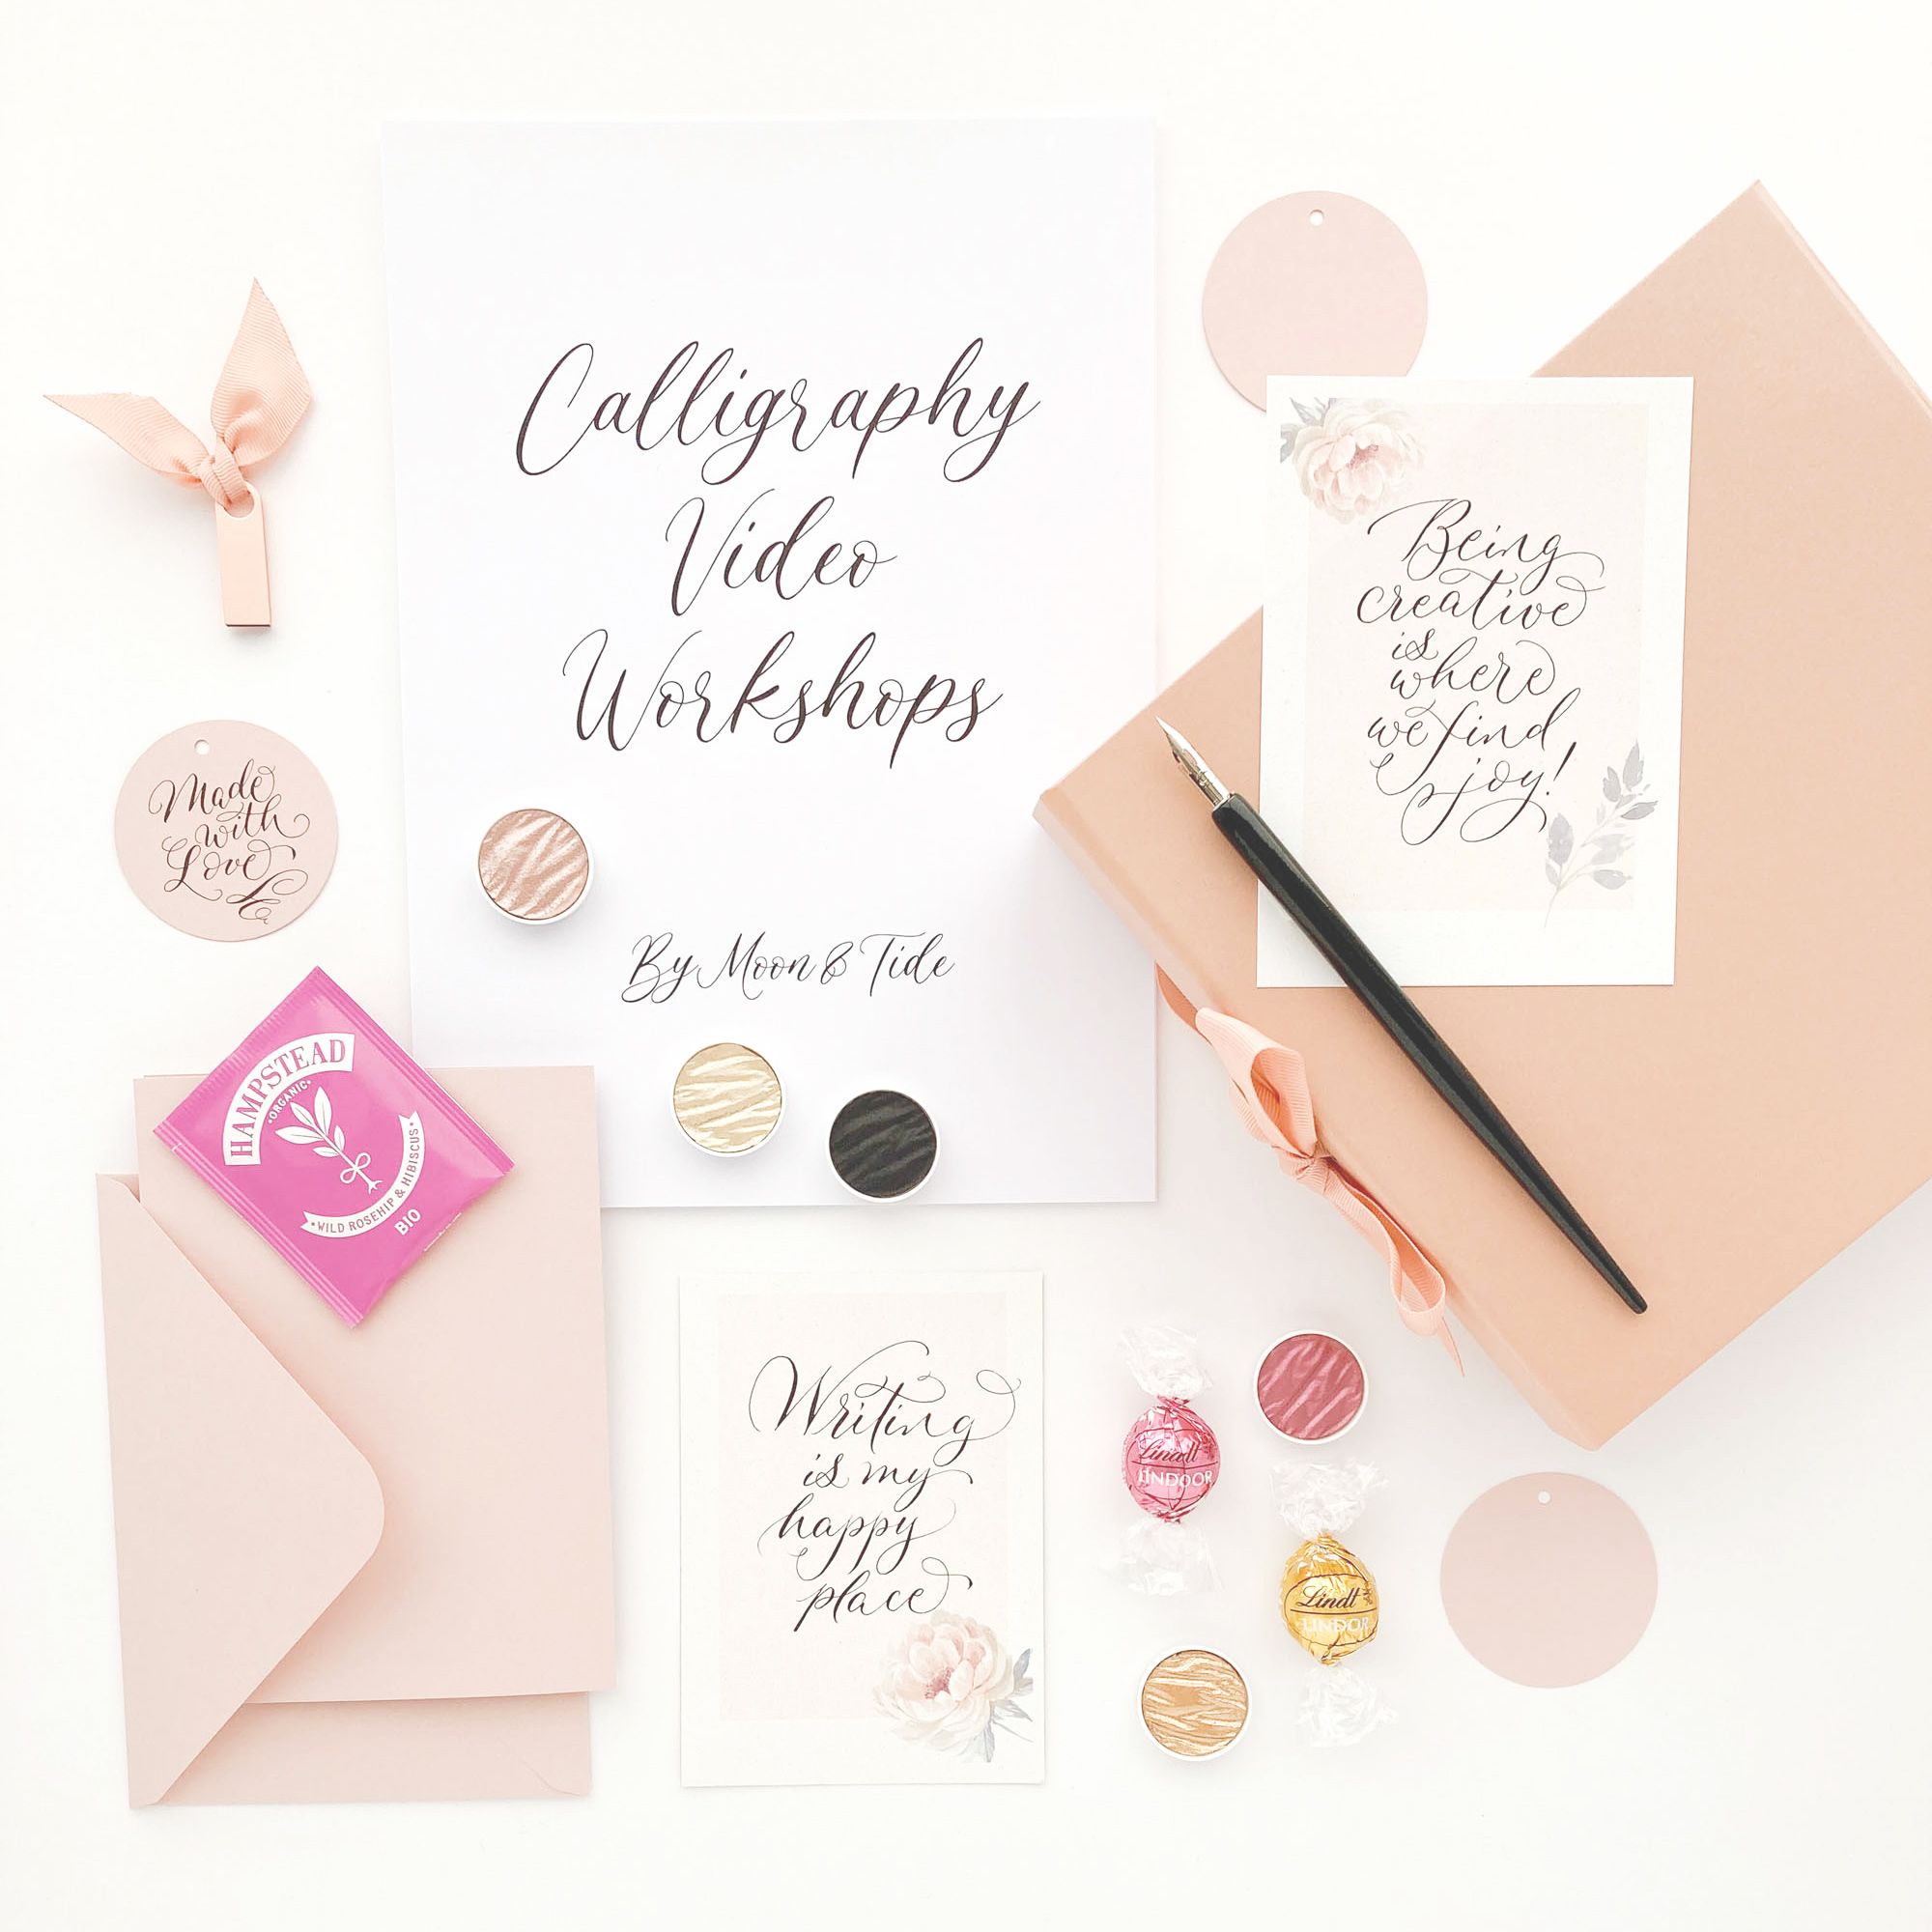 modern calligraphy videos and workshop kit from By Moon and Tide